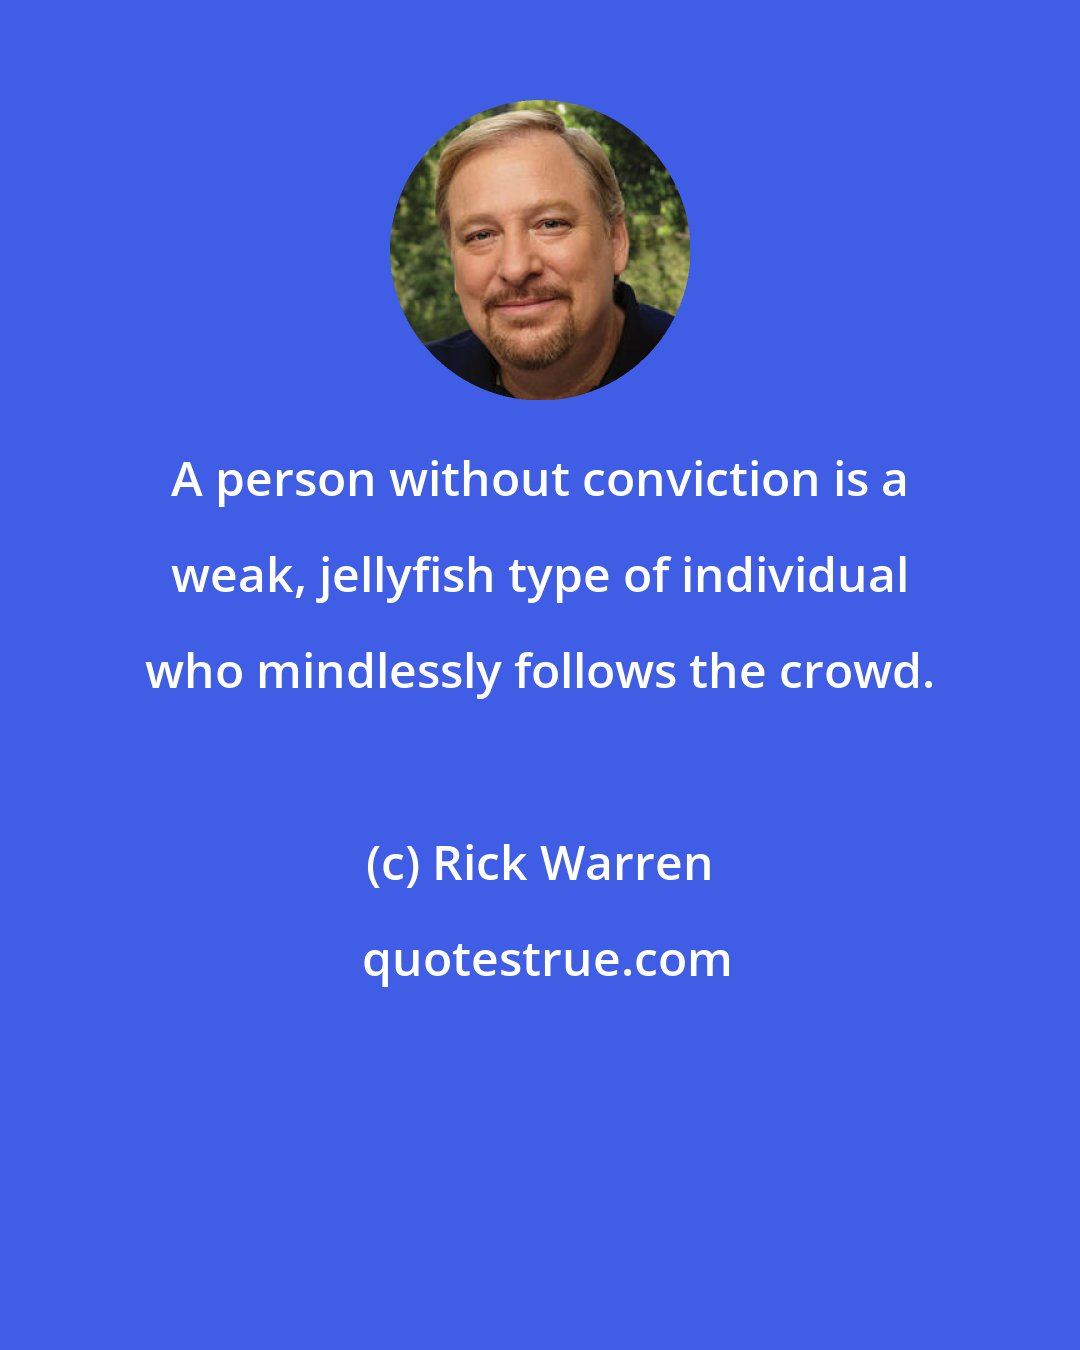 Rick Warren: A person without conviction is a weak, jellyfish type of individual who mindlessly follows the crowd.